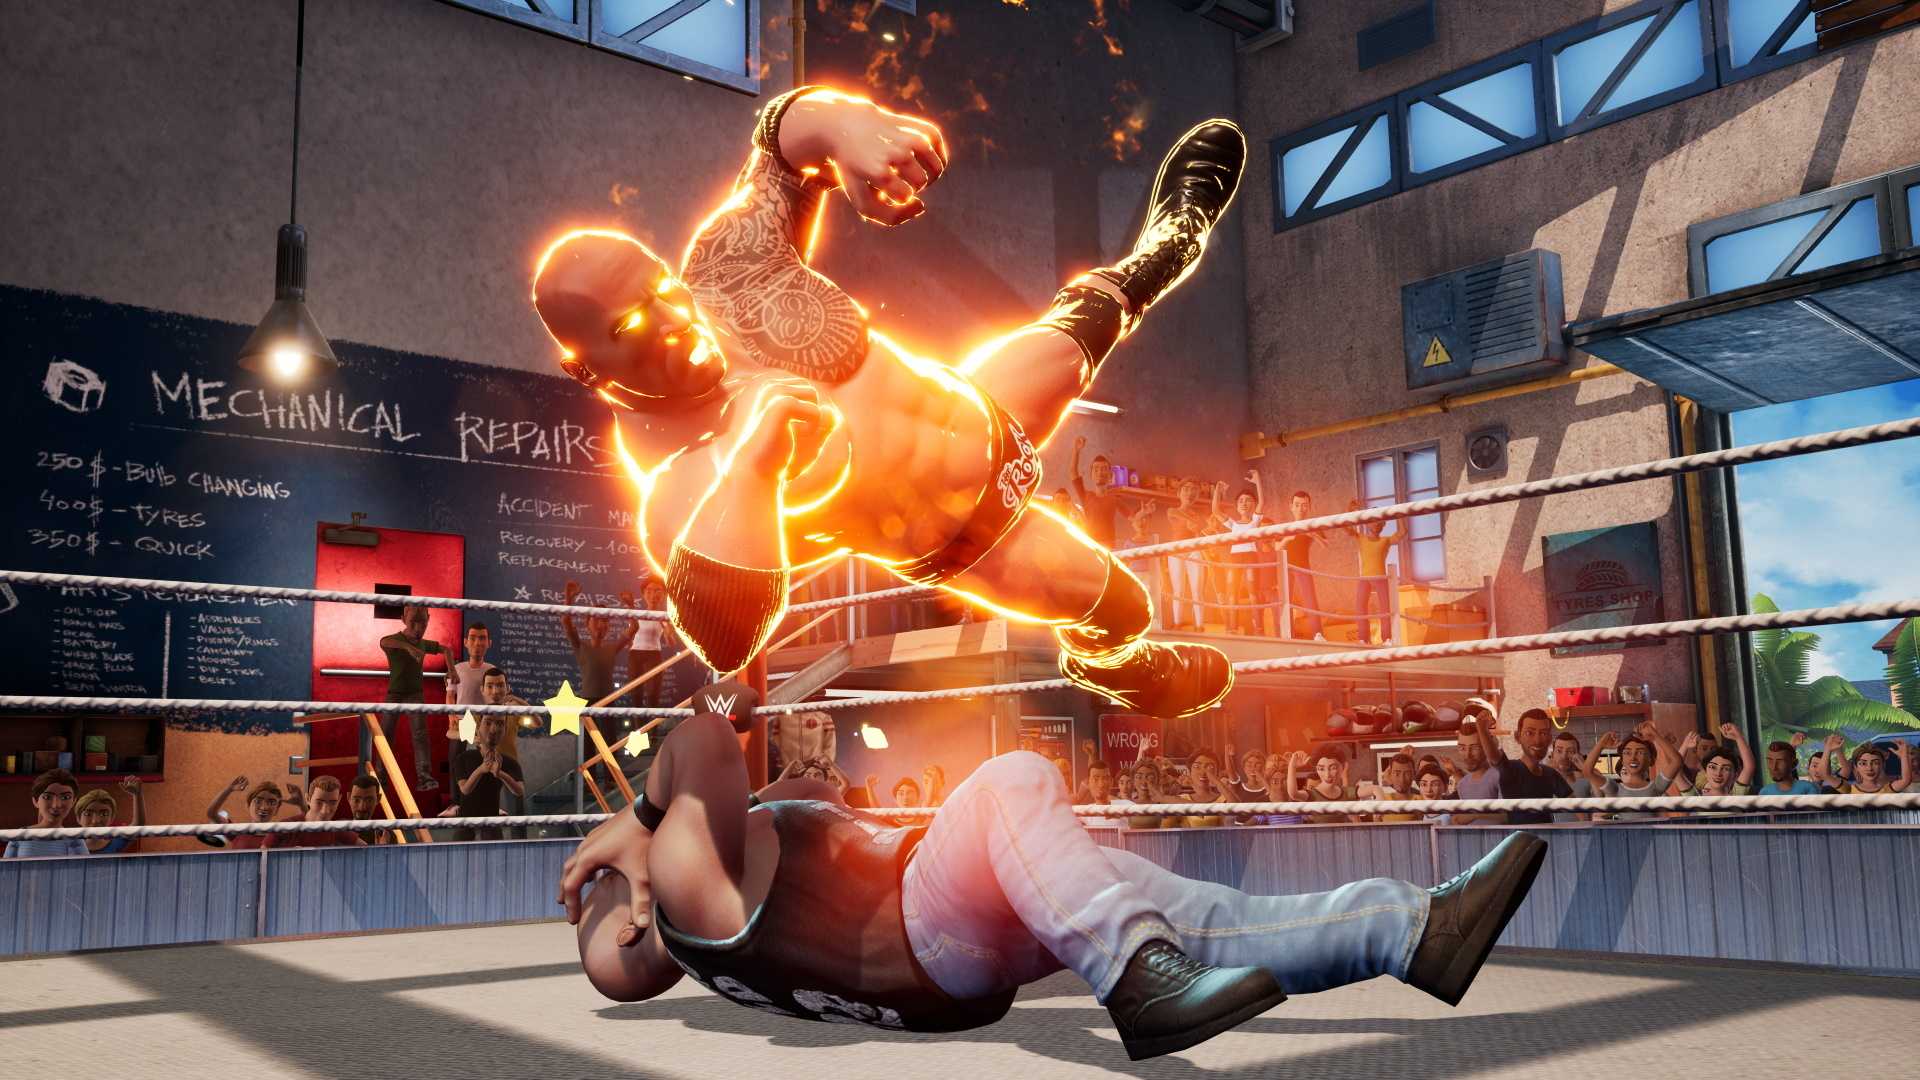 Wwe 2k battlegrounds review – does it deserve a place in wwe game universe?